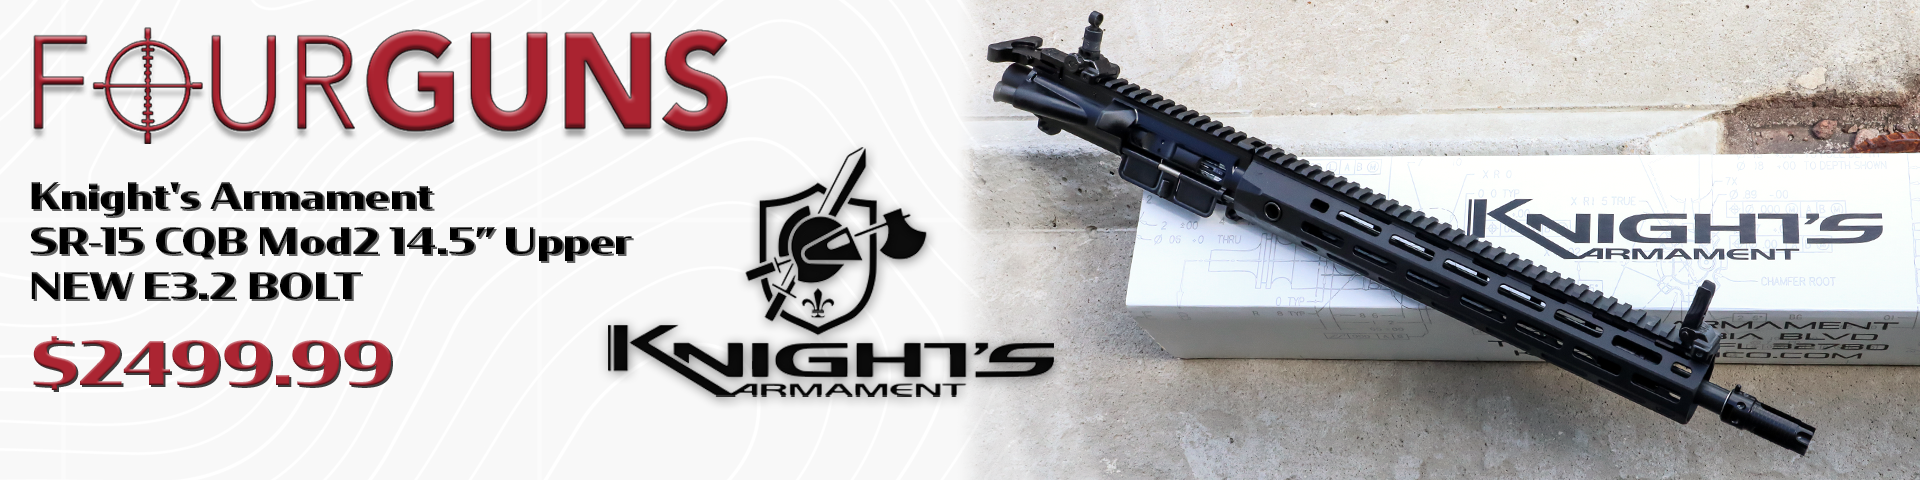 https://www.fourguns.com/products/accessories-knights-armament-company-31949-819064016120-5627